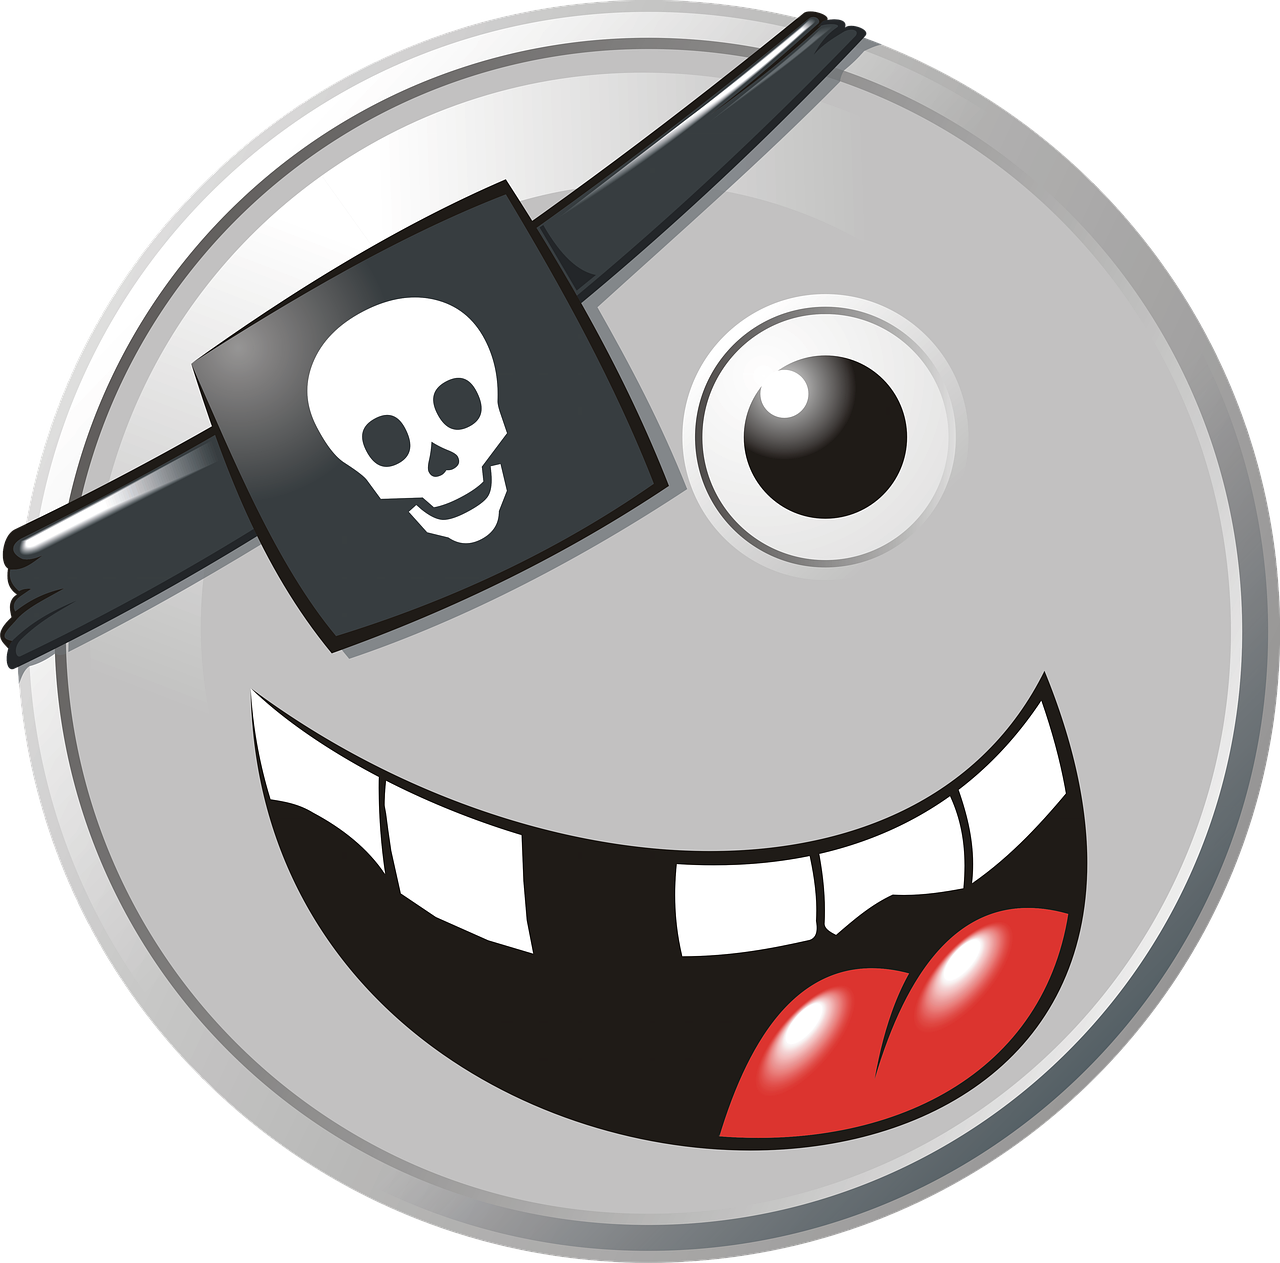 a smiley face with a pirate eye patch on it, an illustration of, mingei, grey metal body, halloween theme, exciting illustration, land mines